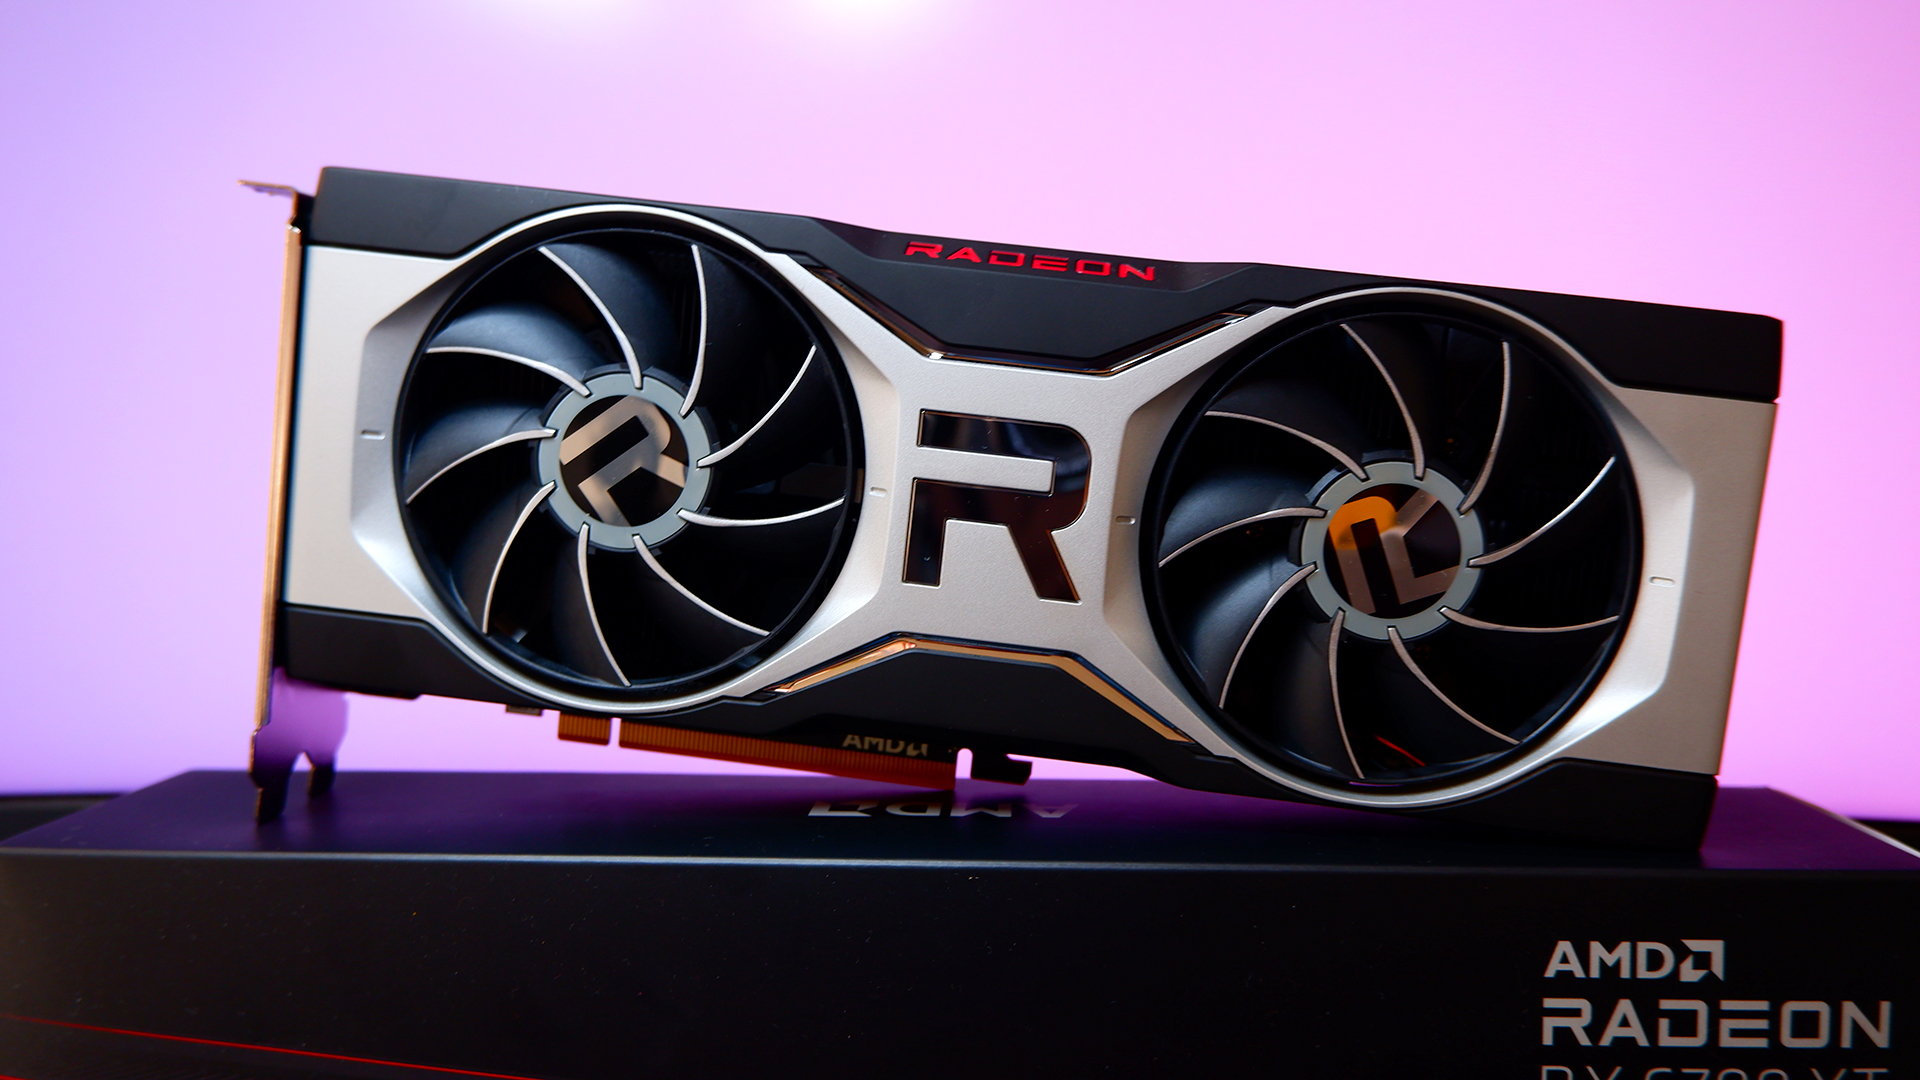 An AMD Radeon RX 6700 XT graphics card with a colourful gradient background